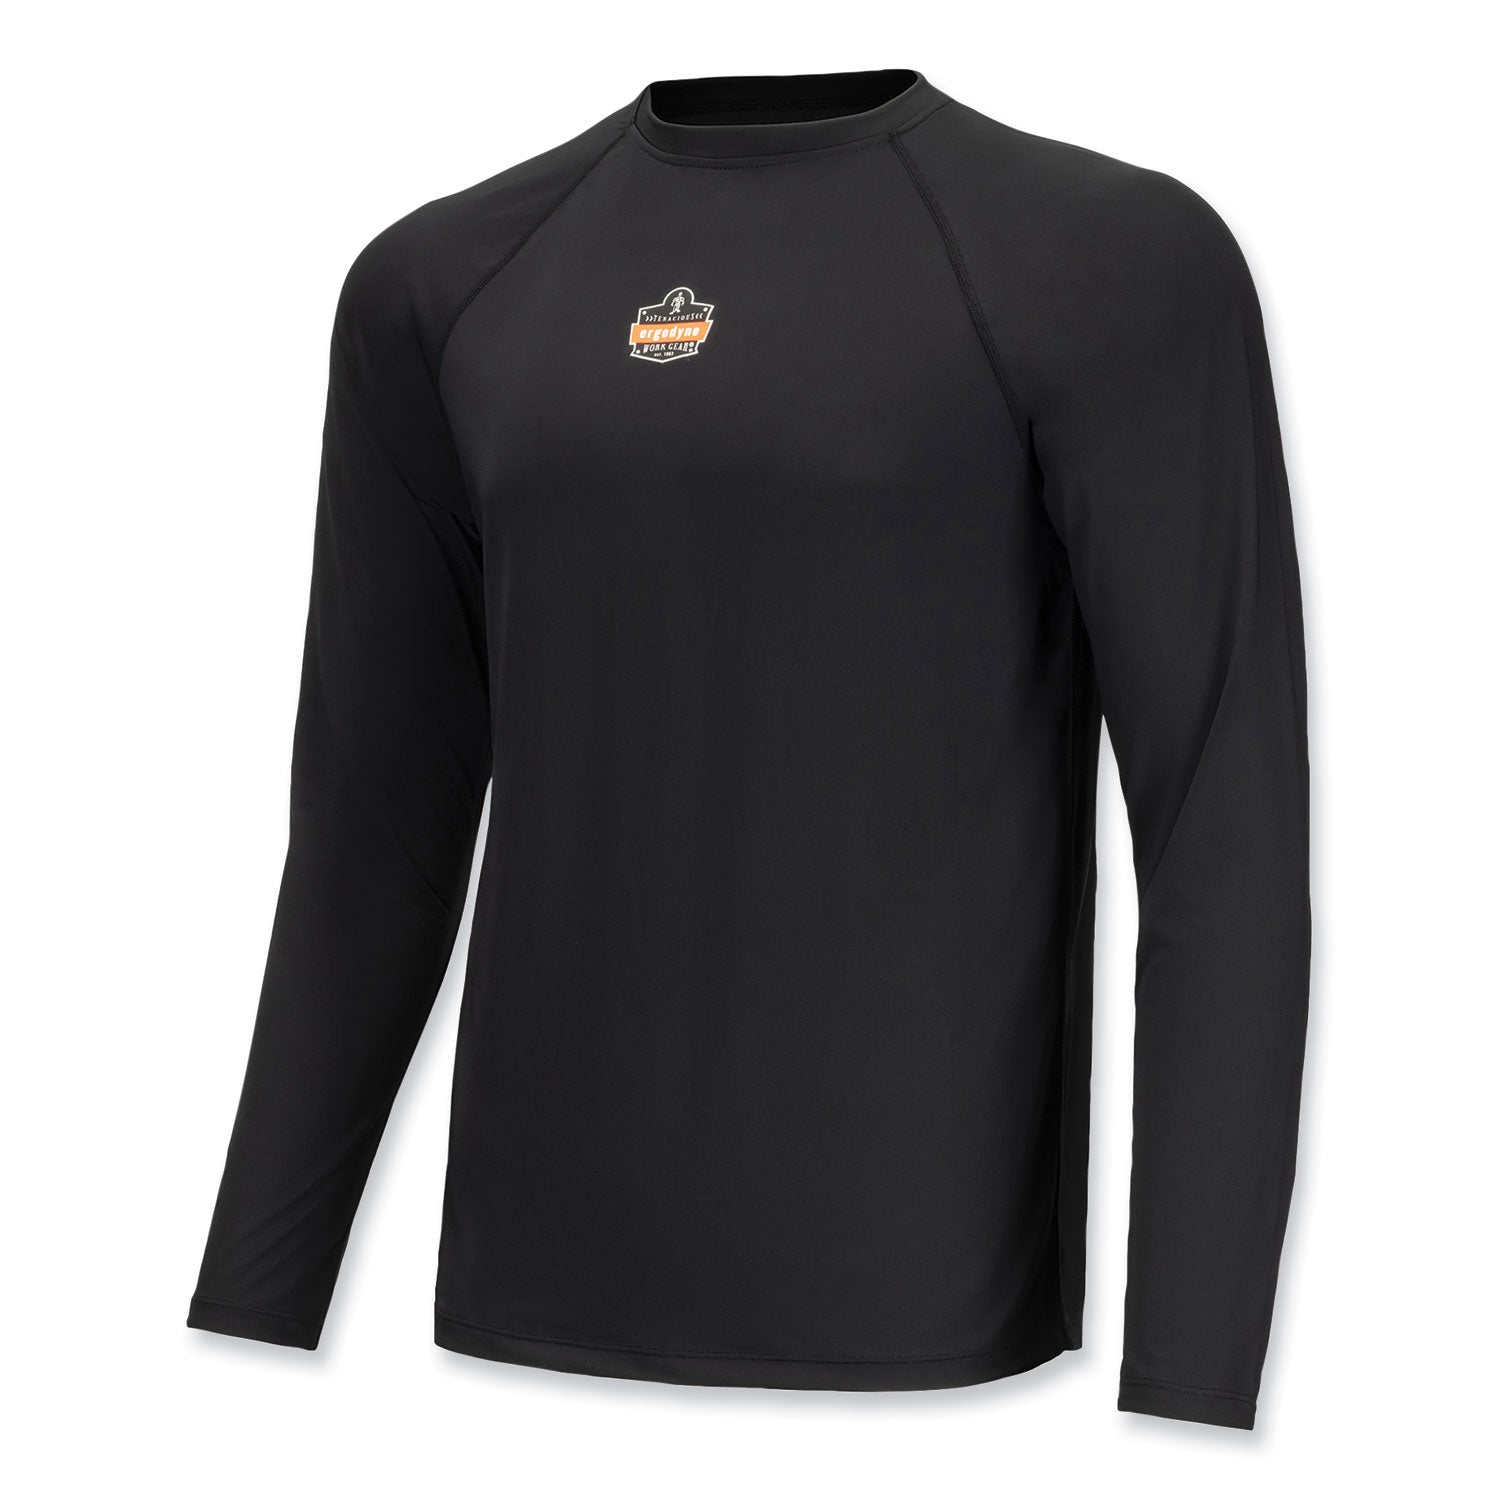 n-ferno-6436-long-sleeve-lightweight-base-layer-shirt-2x-large-black-ships-in-1-3-business-days_ego40236 - 1